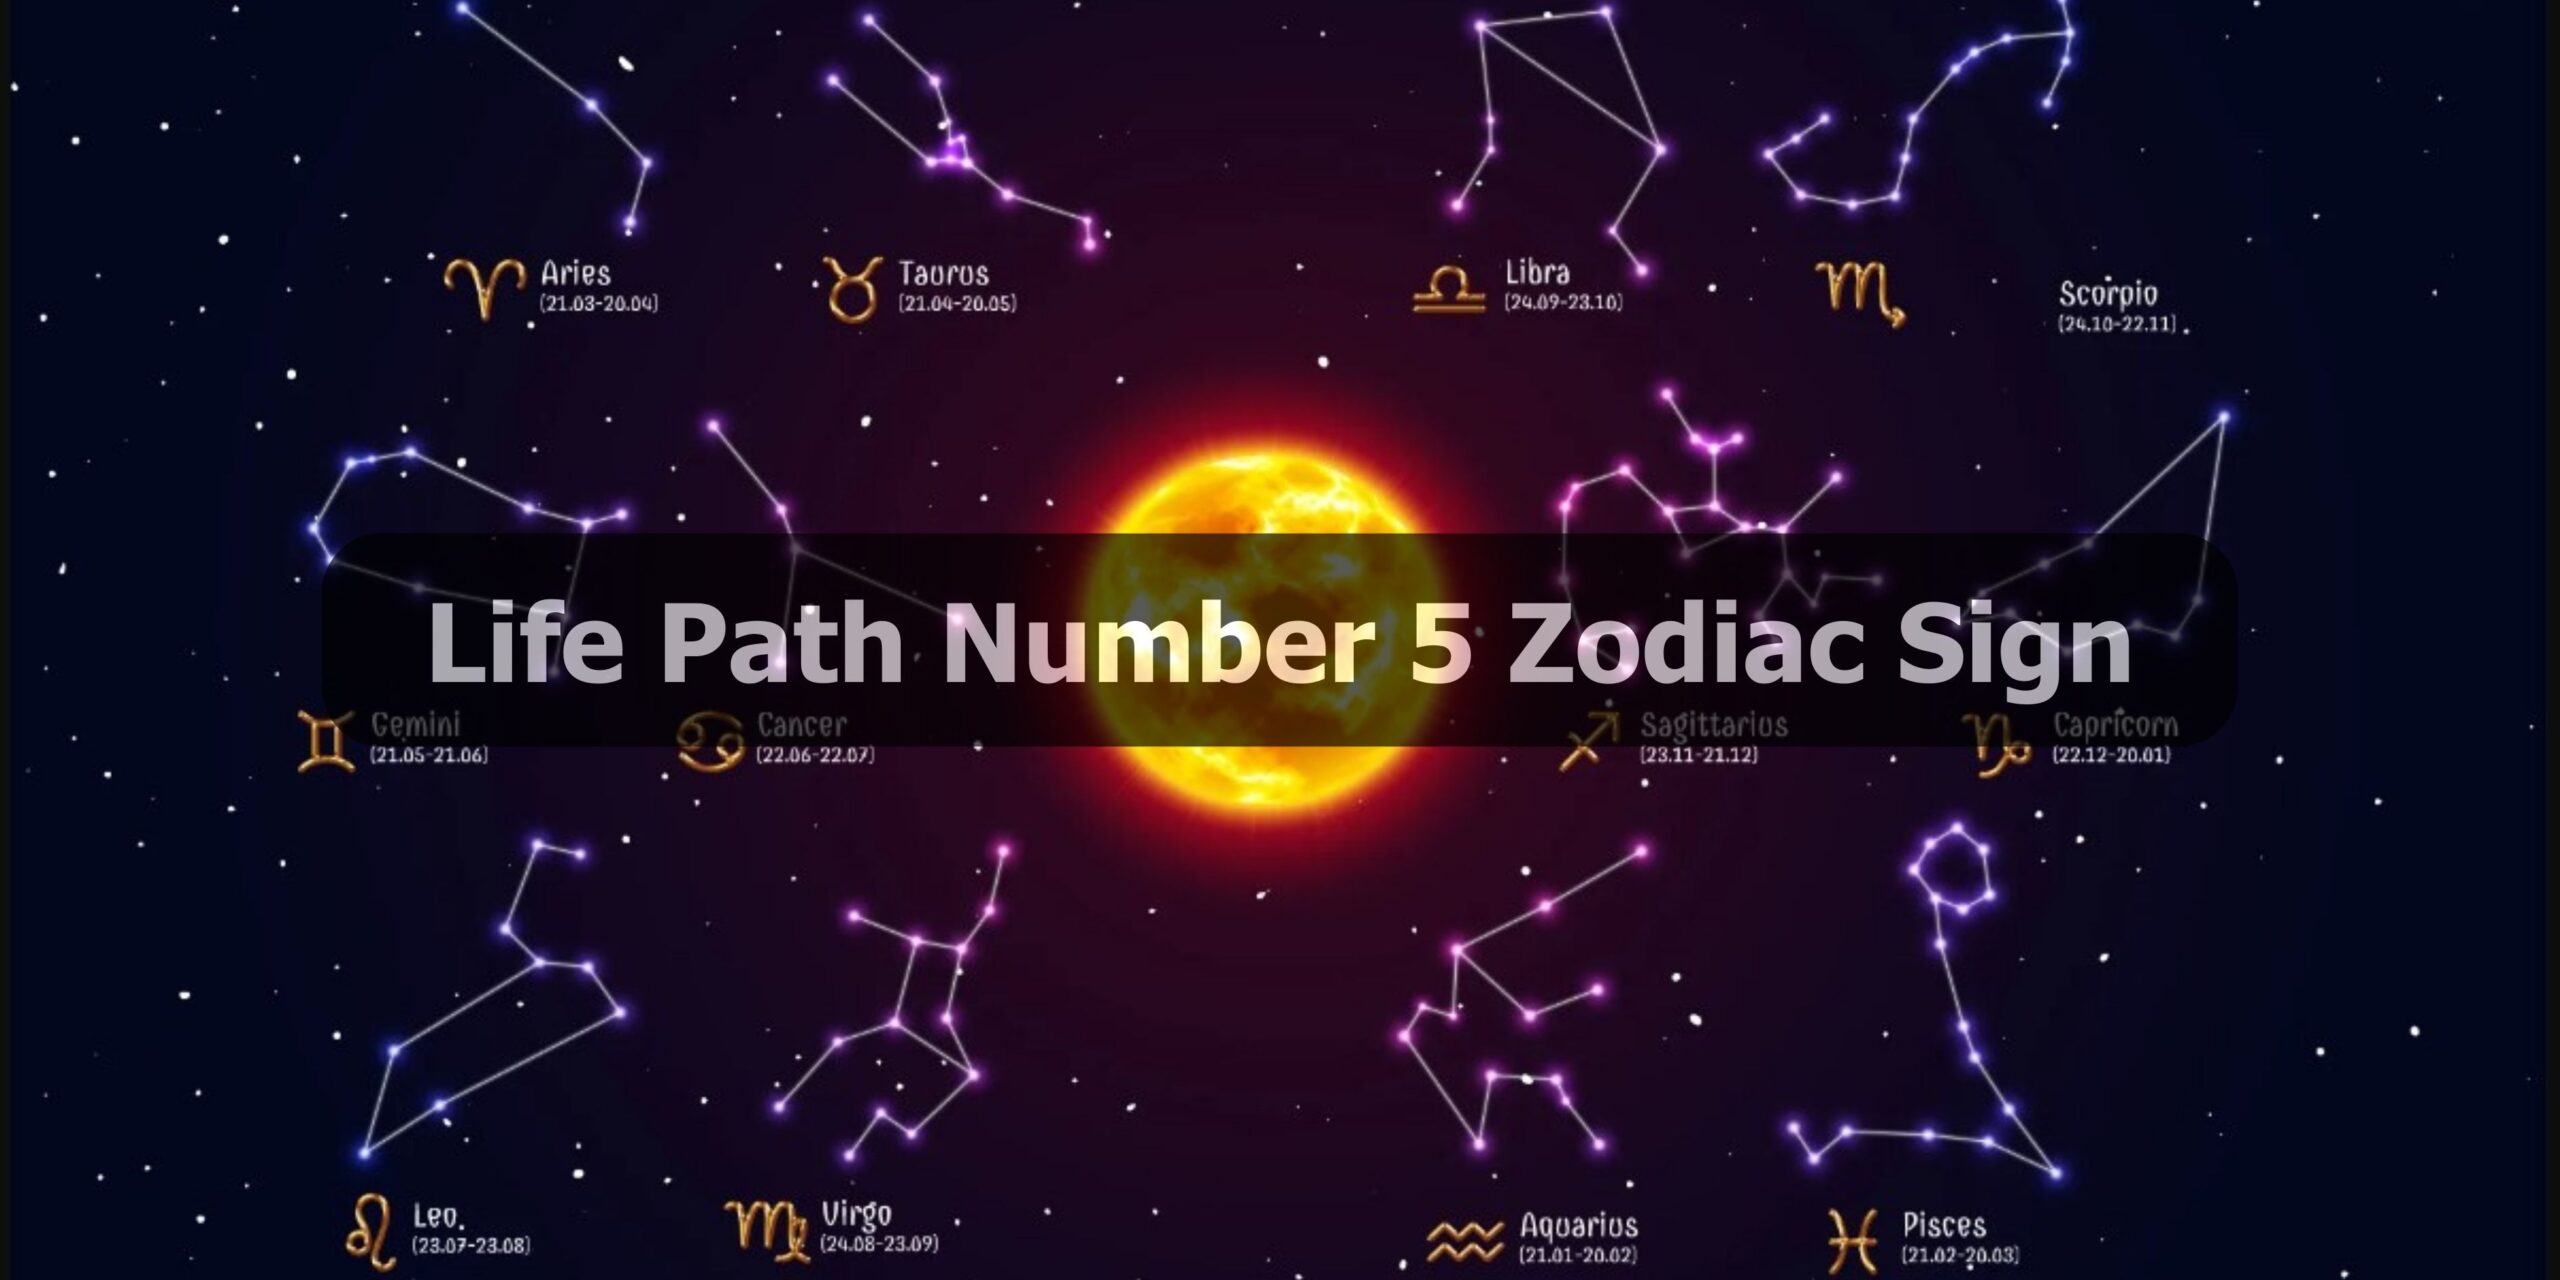 Life Path Number 5 Zodiac Sign